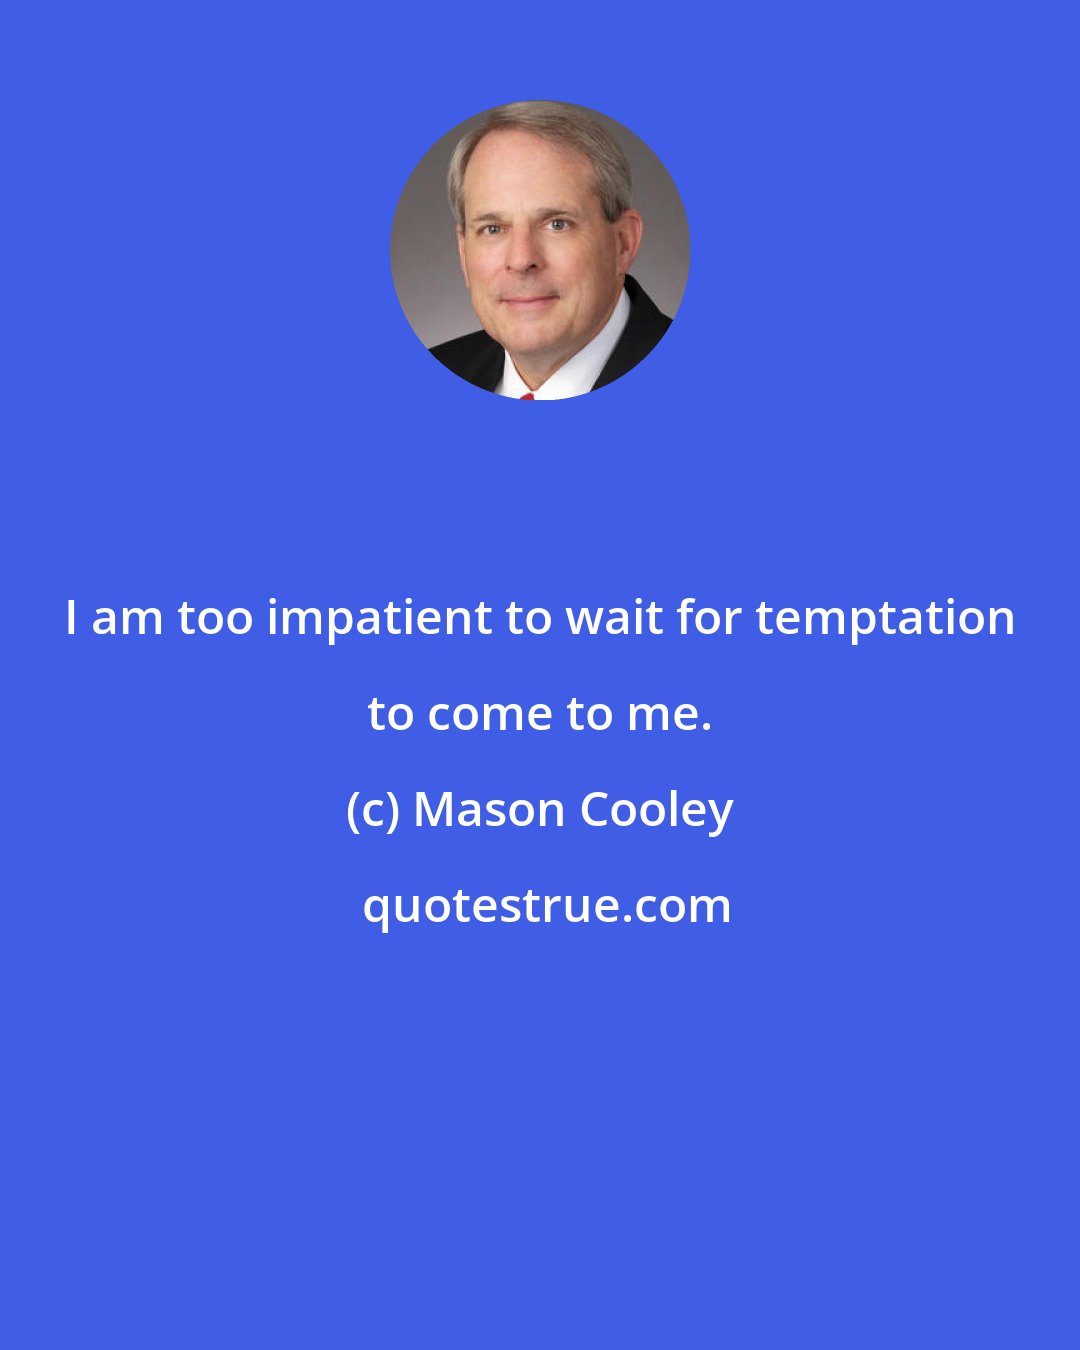 Mason Cooley: I am too impatient to wait for temptation to come to me.